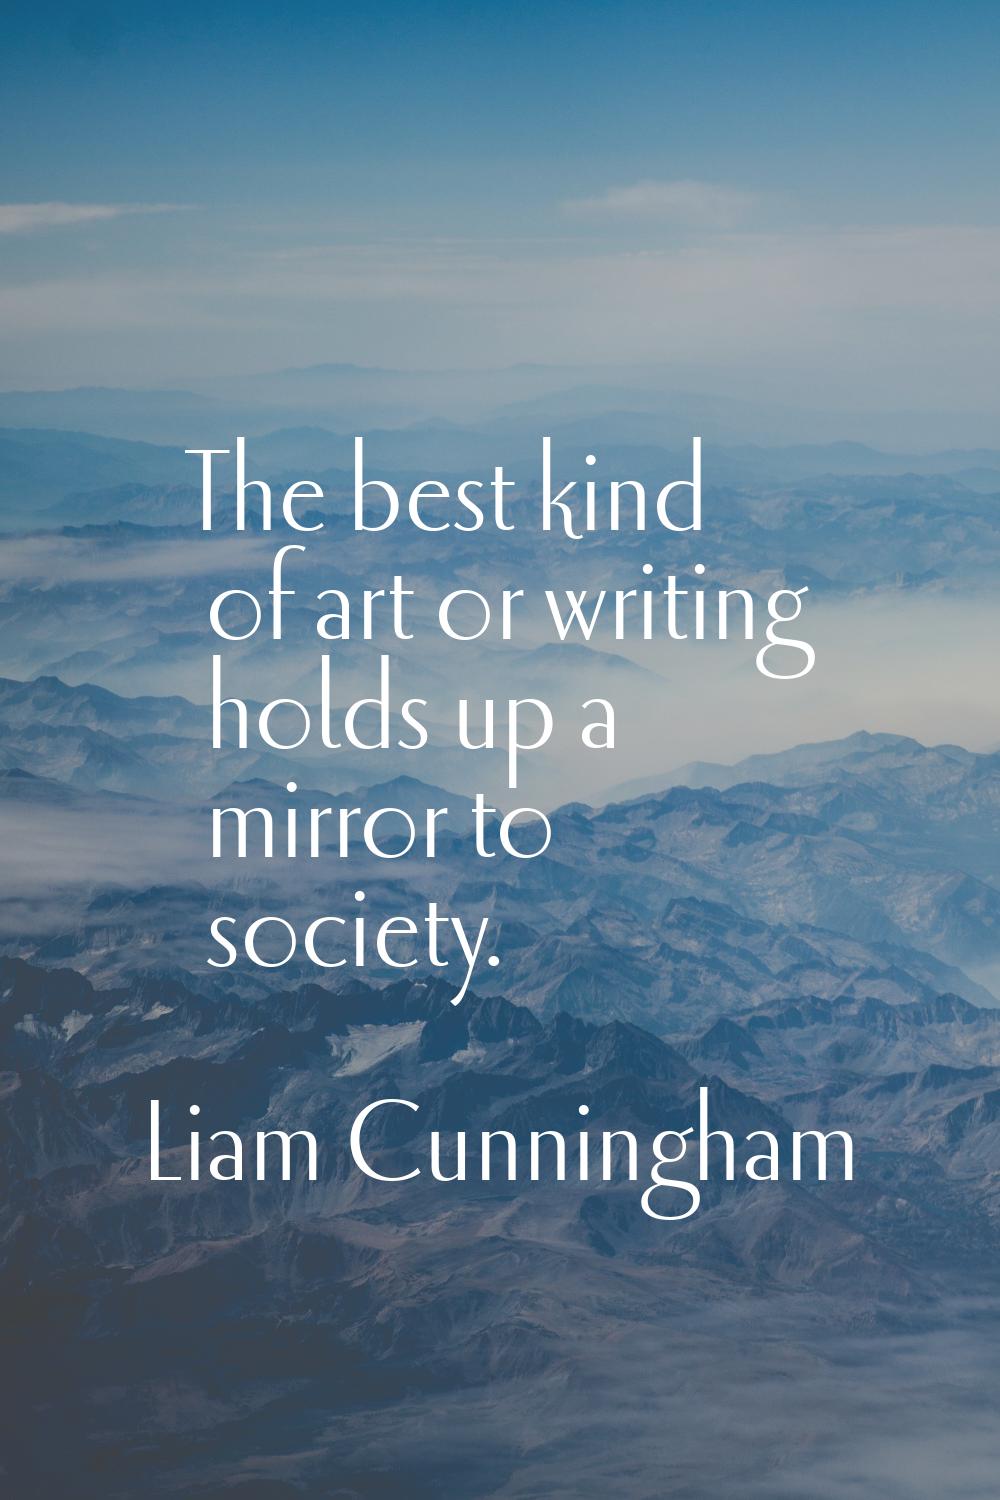 The best kind of art or writing holds up a mirror to society.